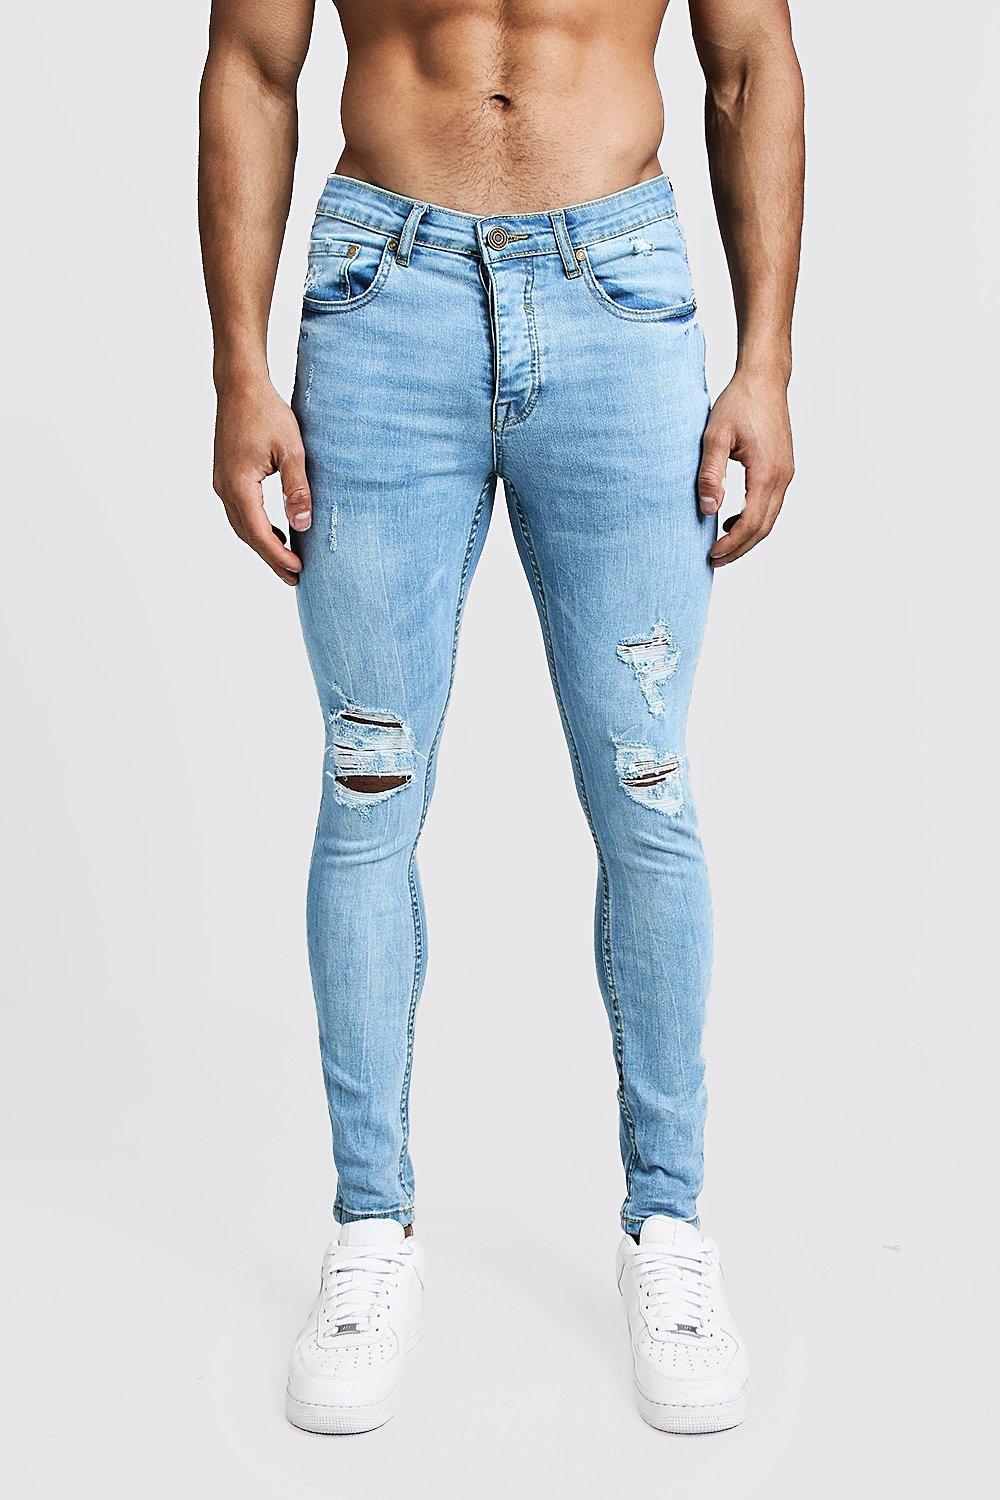 BoohooMAN Spray On Skinny Jeans With Distressed Knees in Blue for Men ...